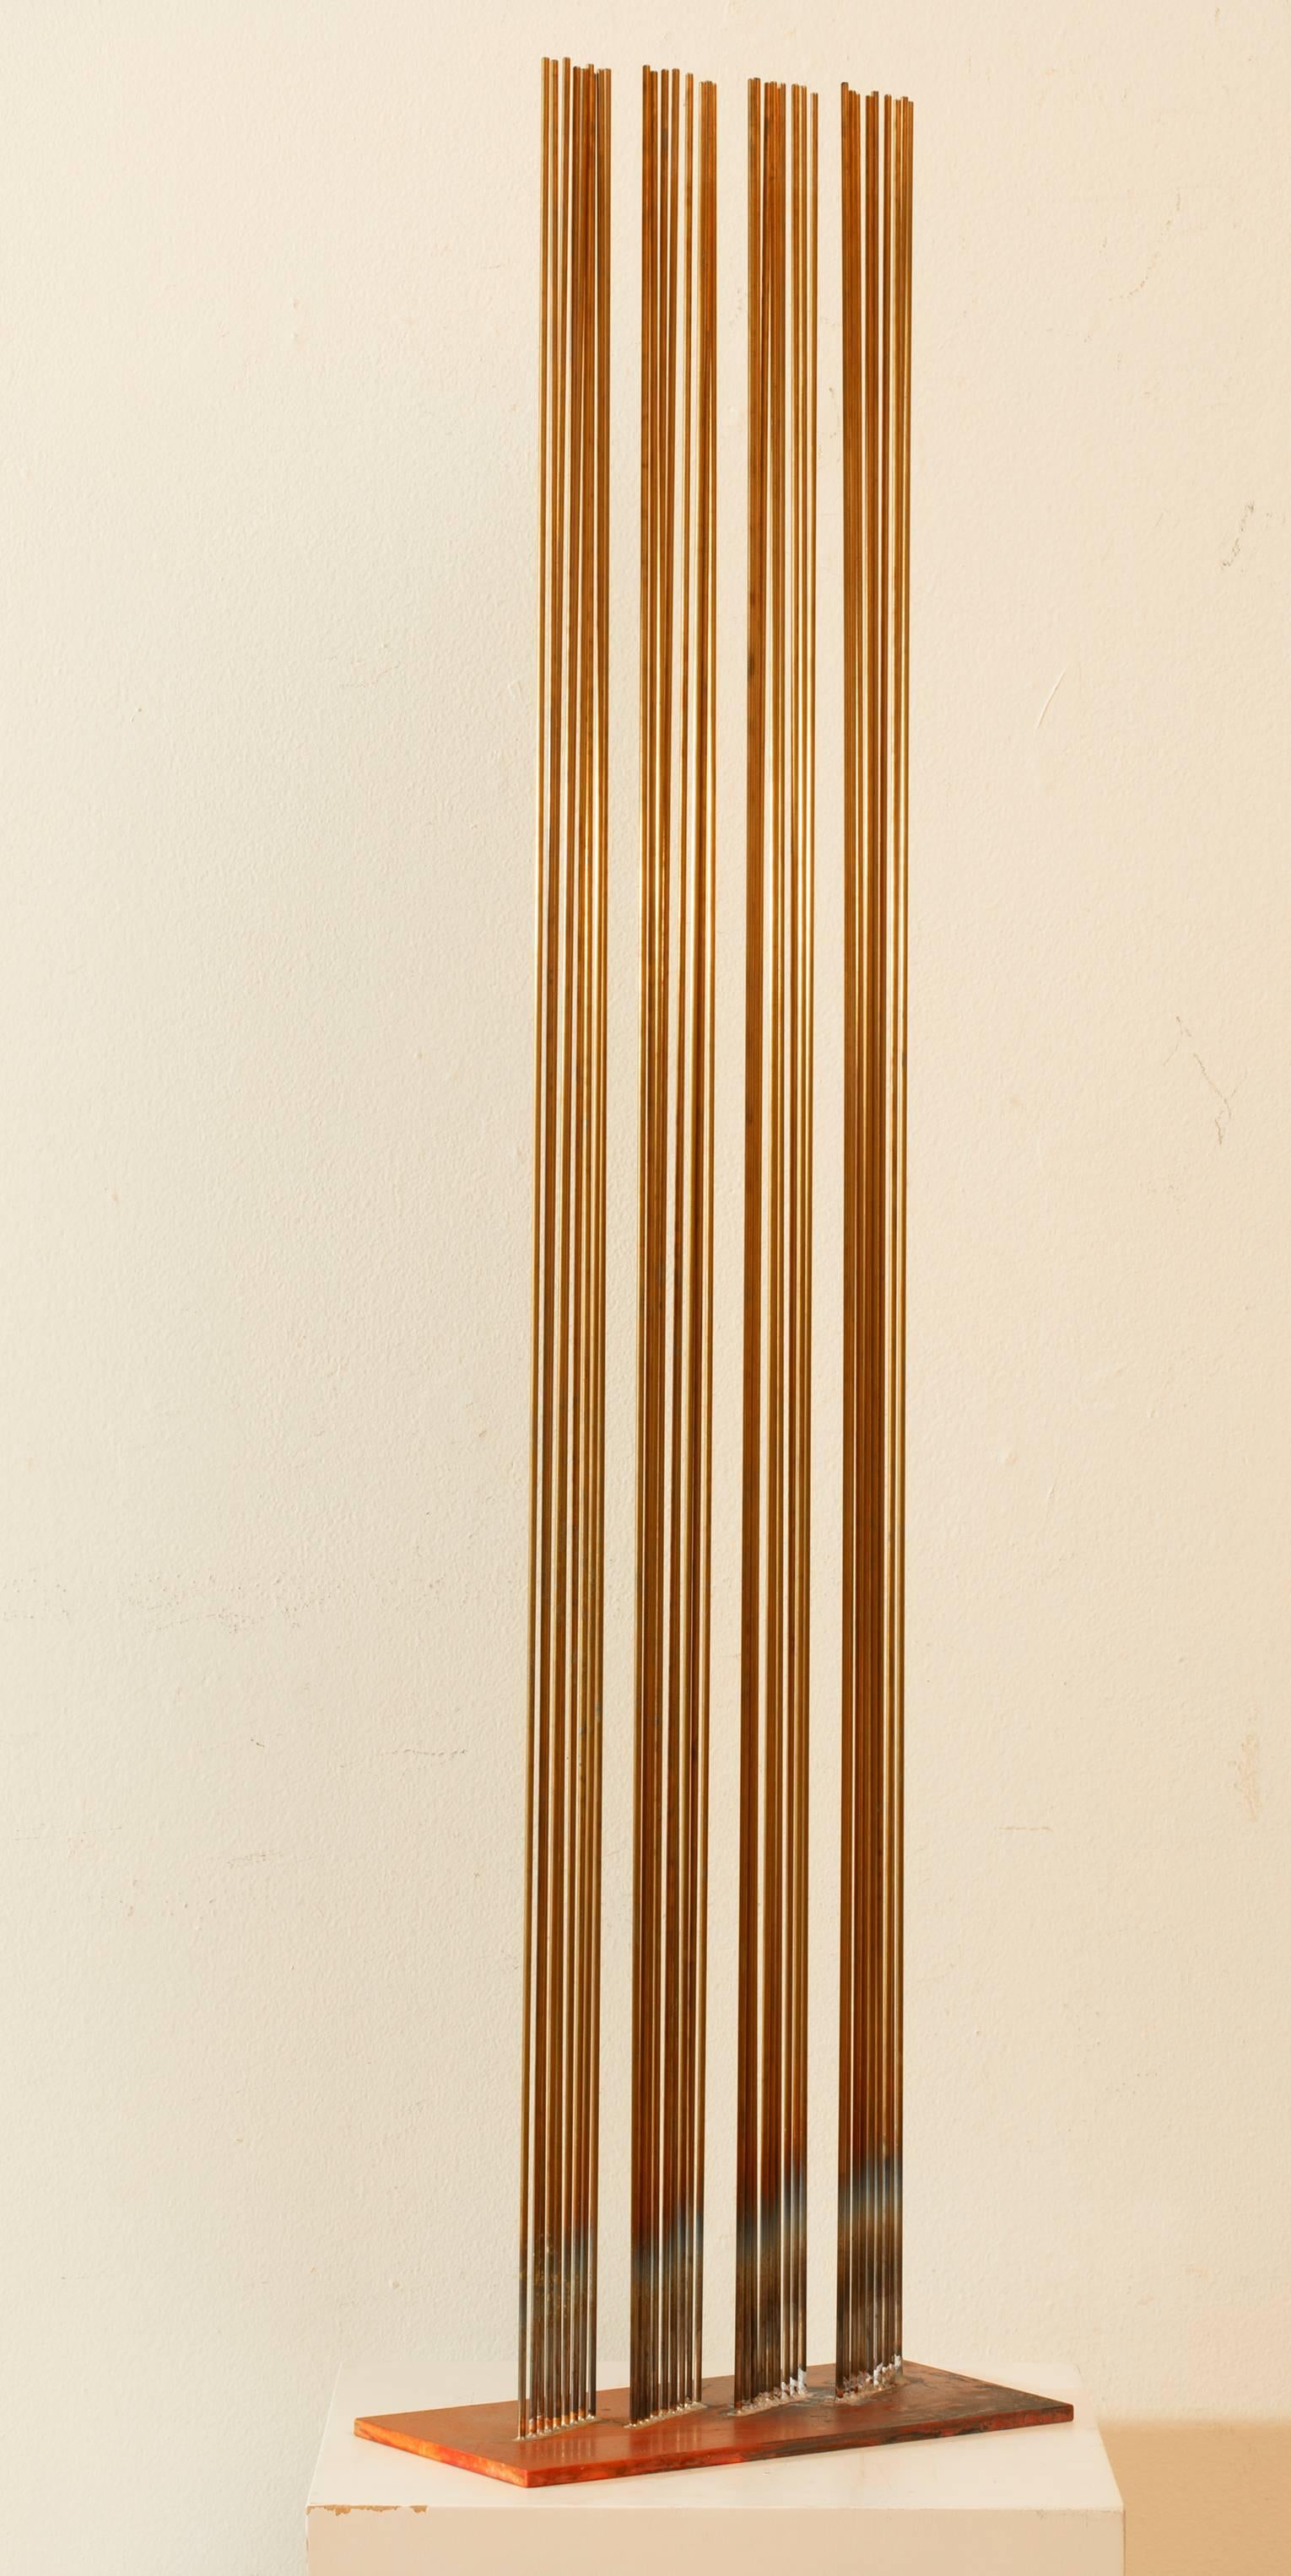 Val Bertoia Abstract Sculpture - 36 Rods of Sound in 4 Groups